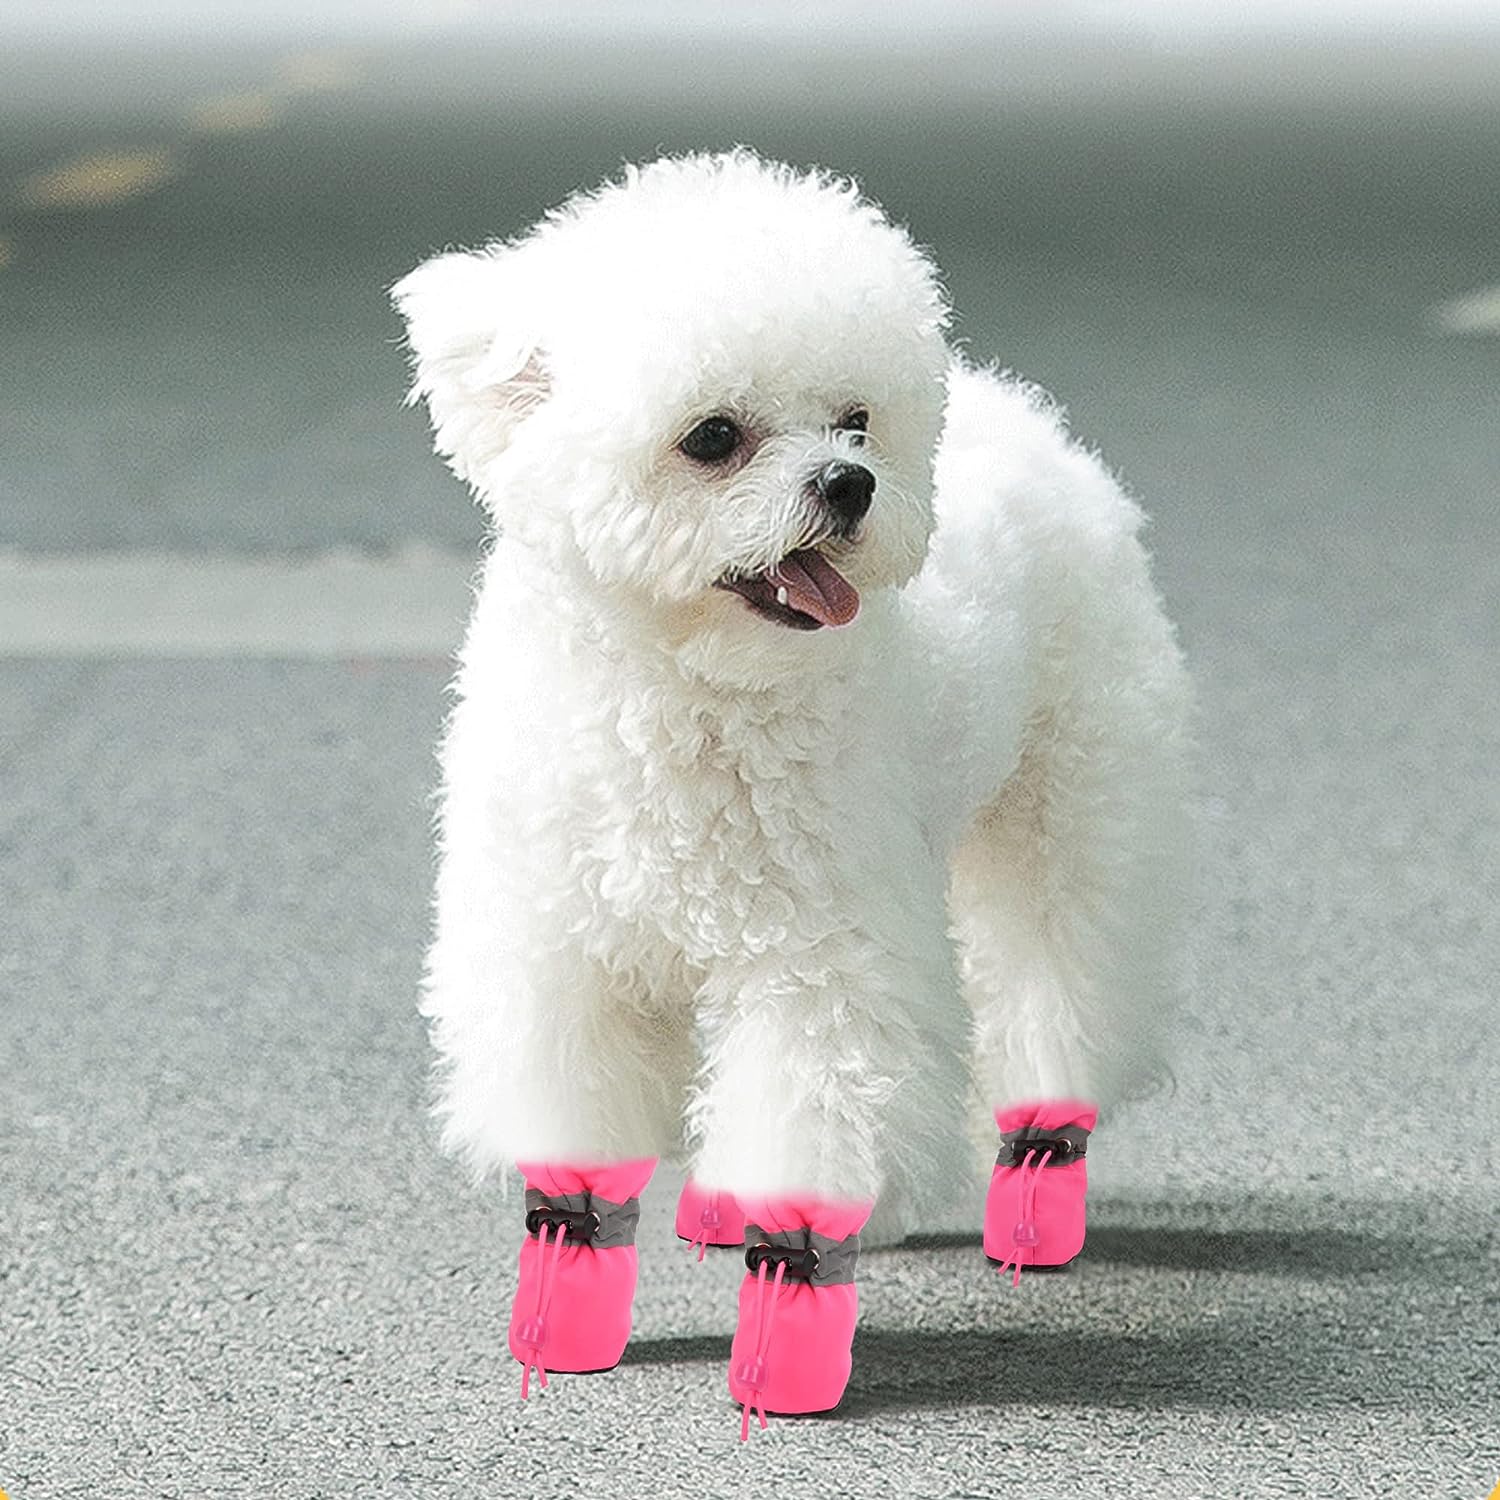 Shop KUTKUT Dog Boots - 4 Anti-Slip Paw Protectors for Small Dogs